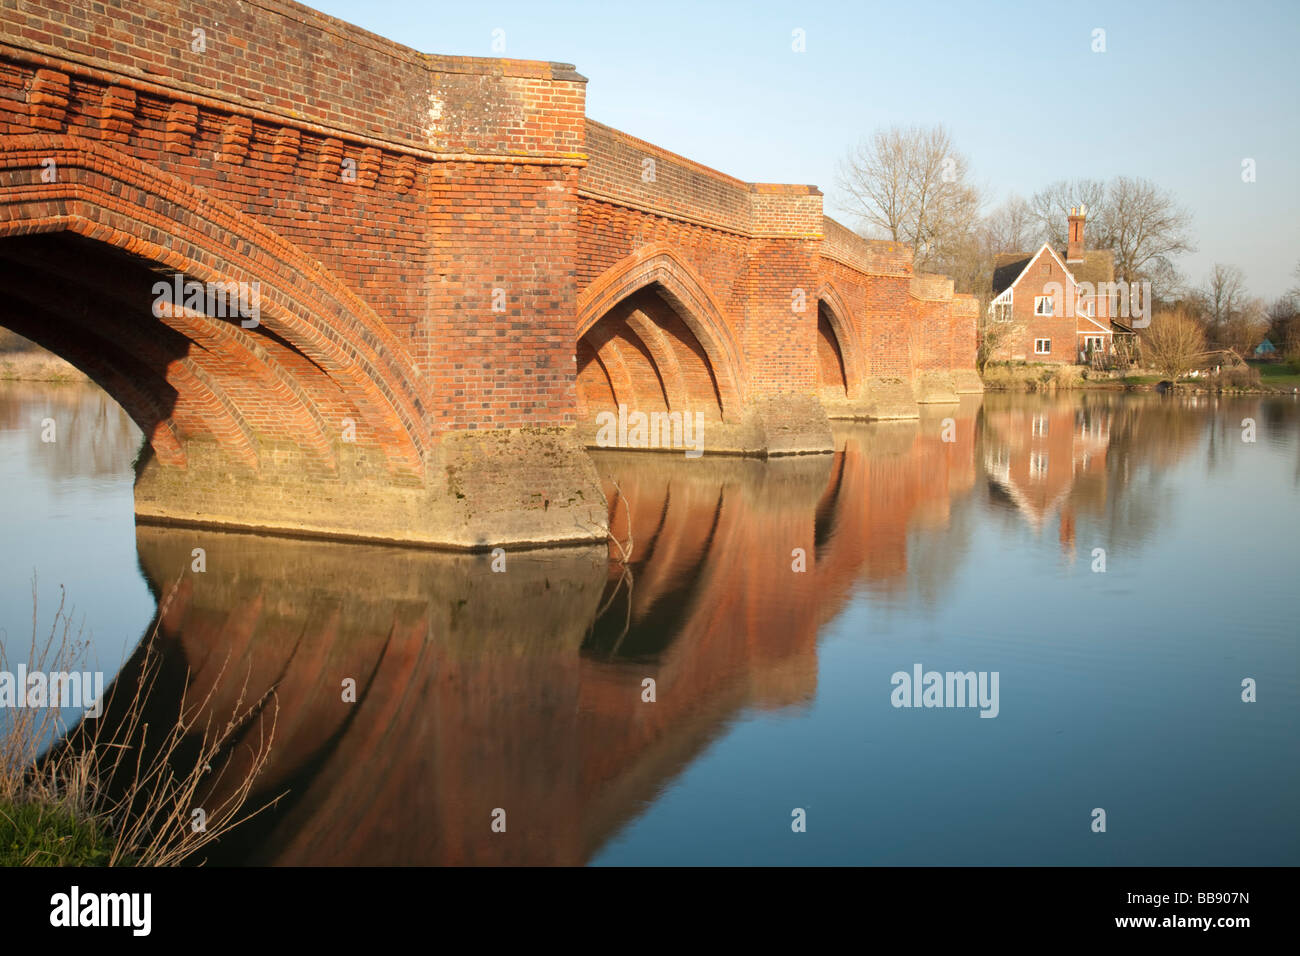 Road Bridge over the River Thames at Clifton Hampden in Oxfordshire Uk Stock Photo